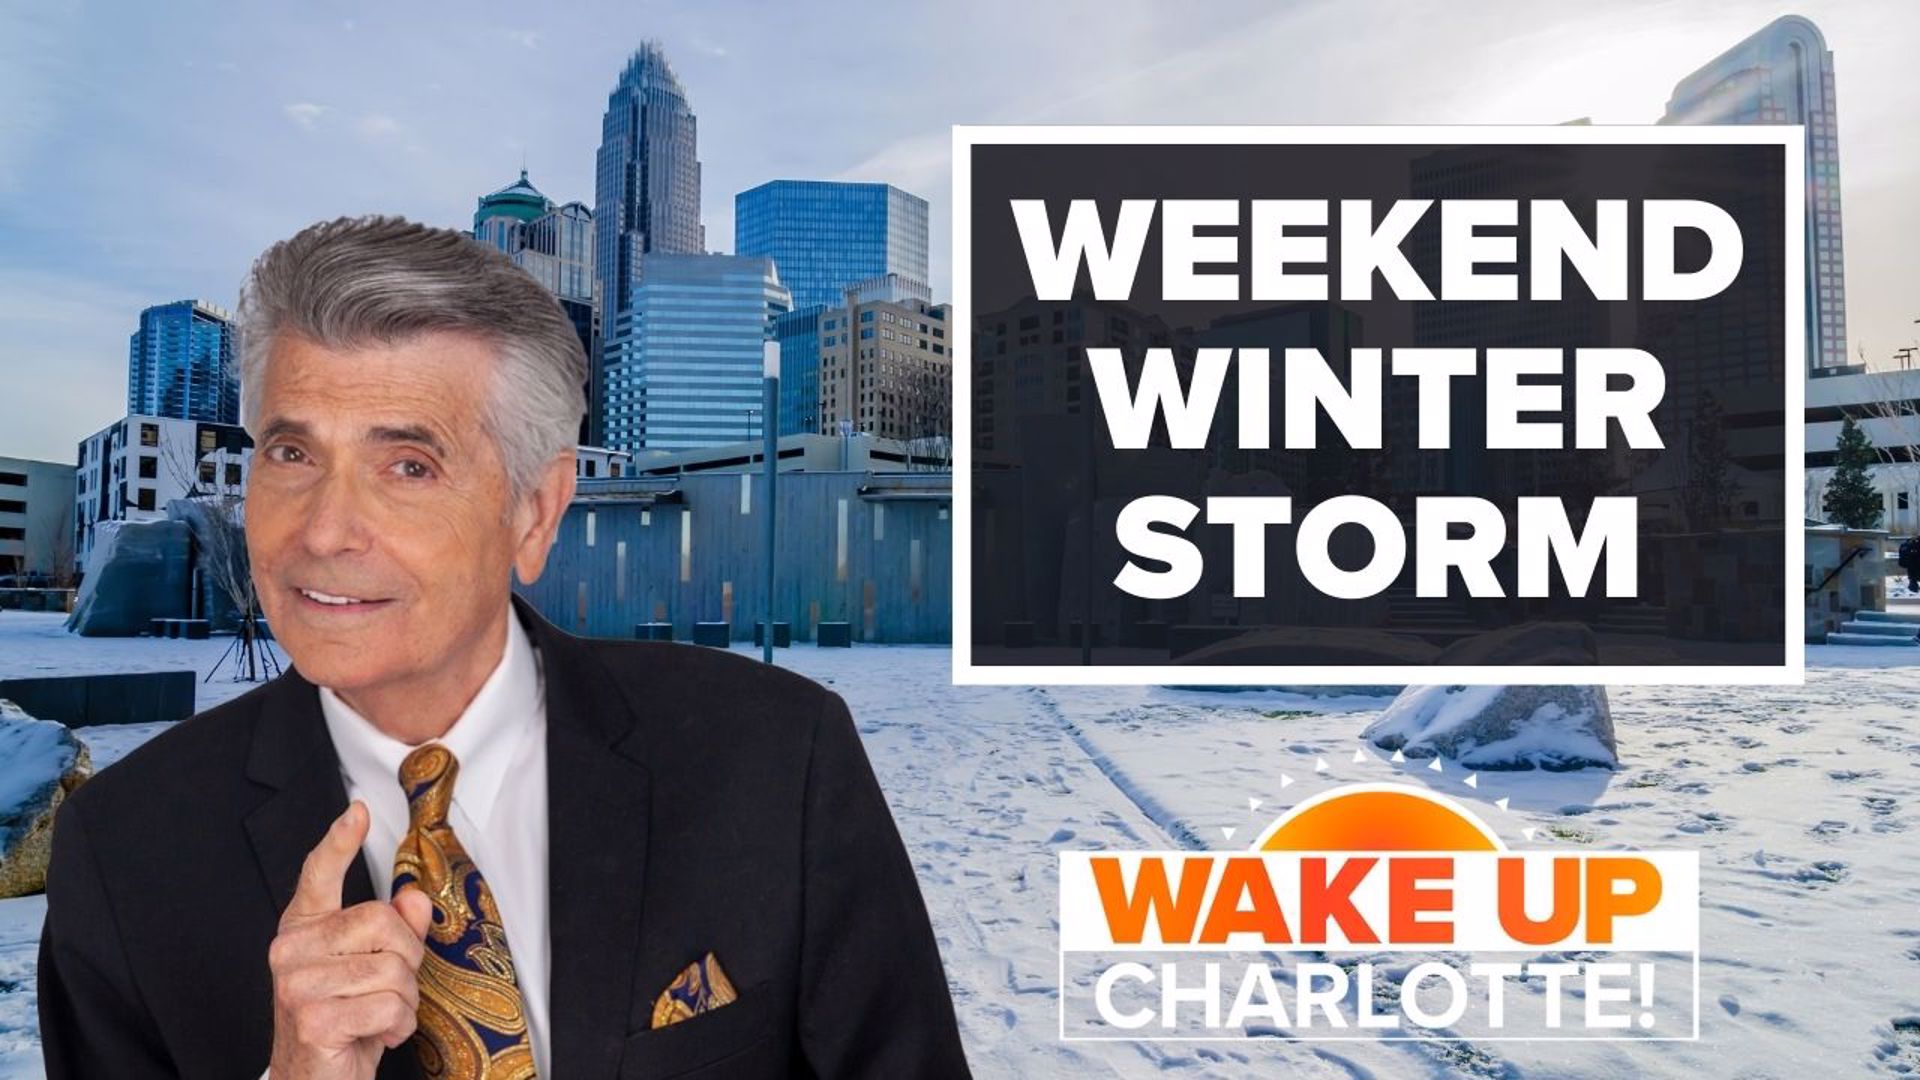 First warn forecaster Larry Sprinkle and meteorologist Brittany Van Voorhees preview this weekend's winter storms and preps you can make at home.